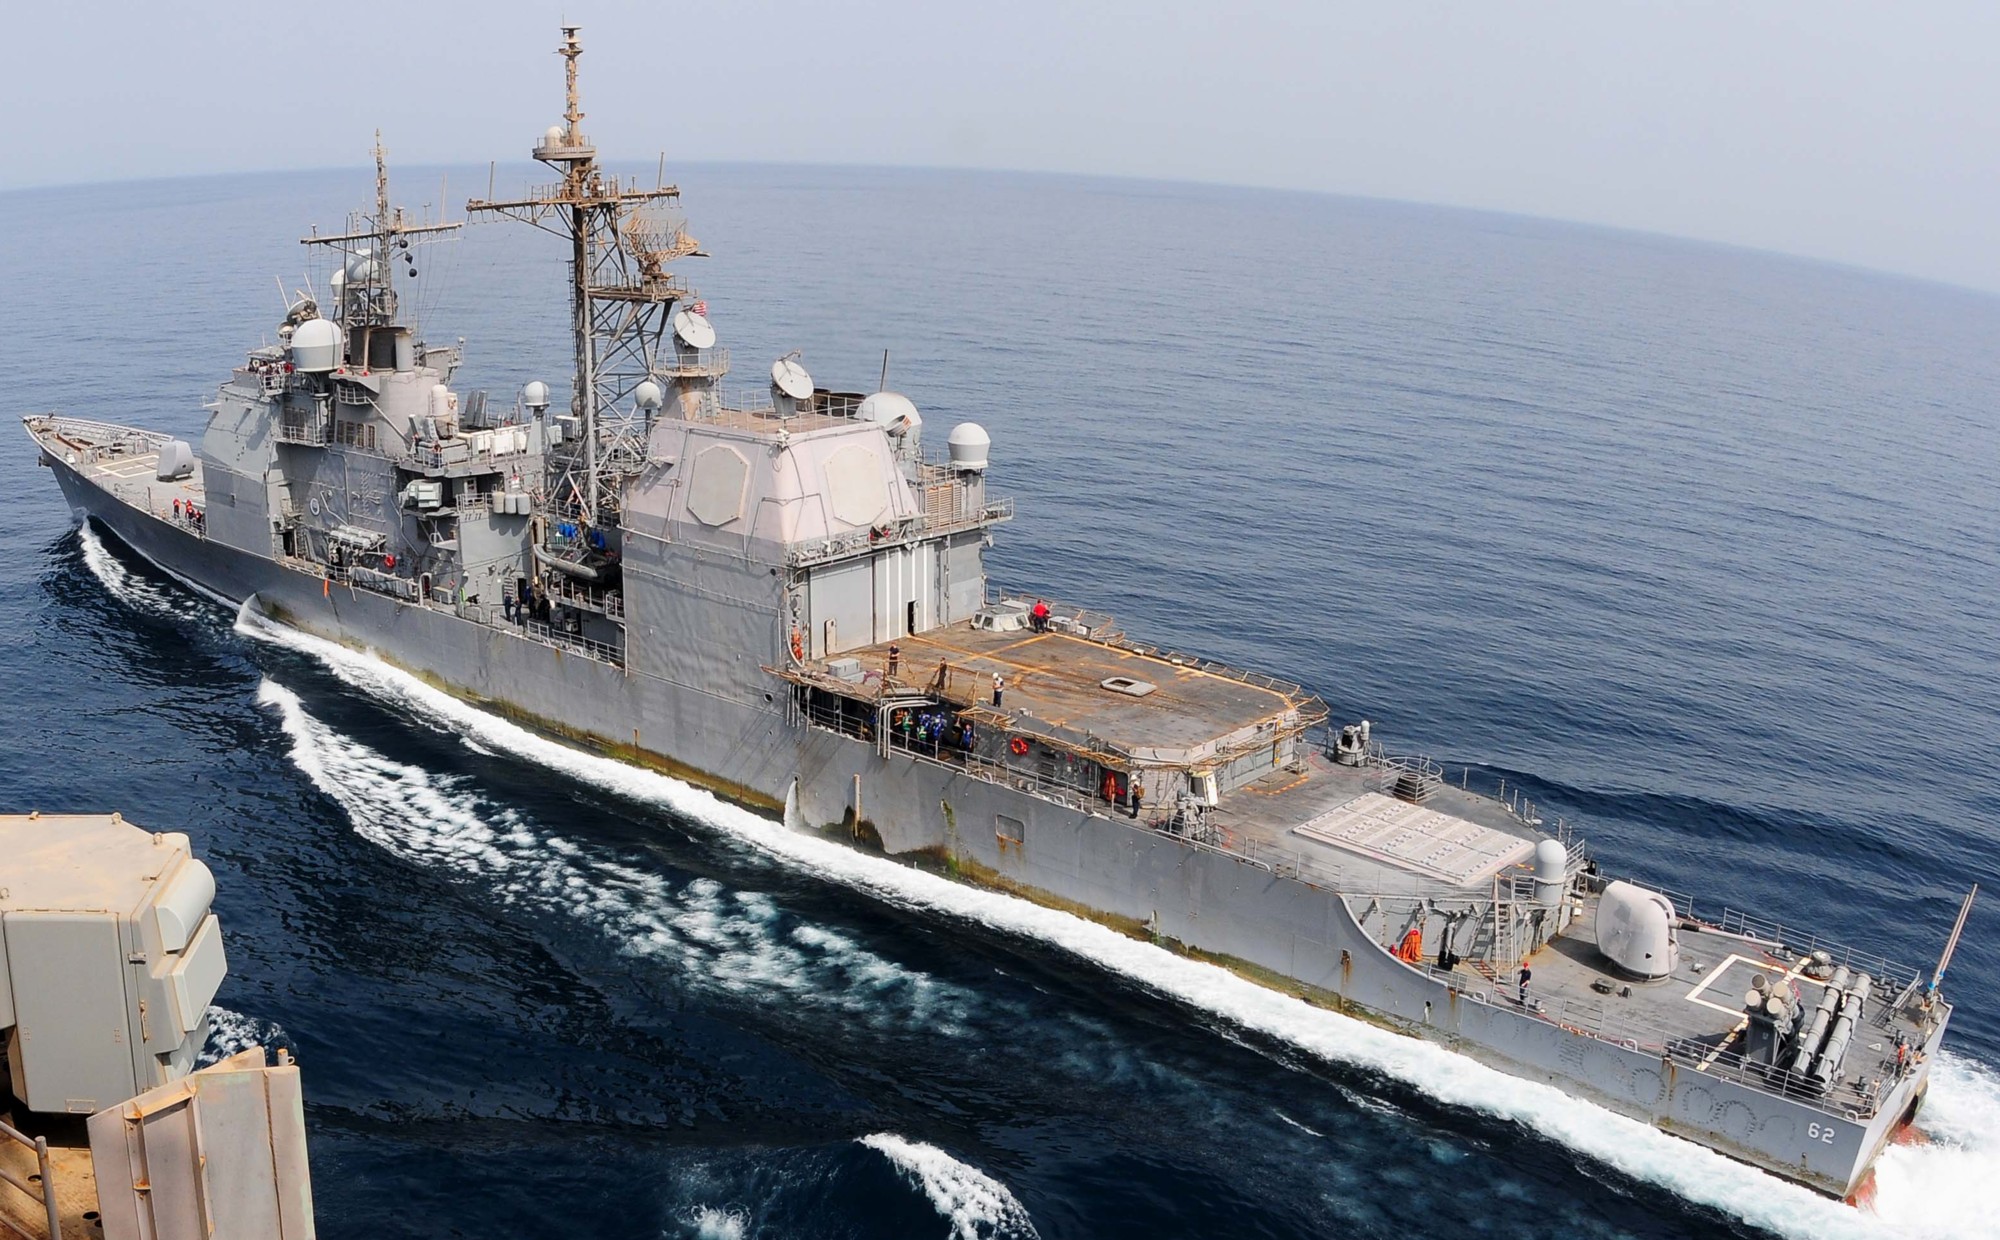 cg-62 uss chancellorsville ticonderoga class guided missile cruiser aegis us navy gulf of aden 30